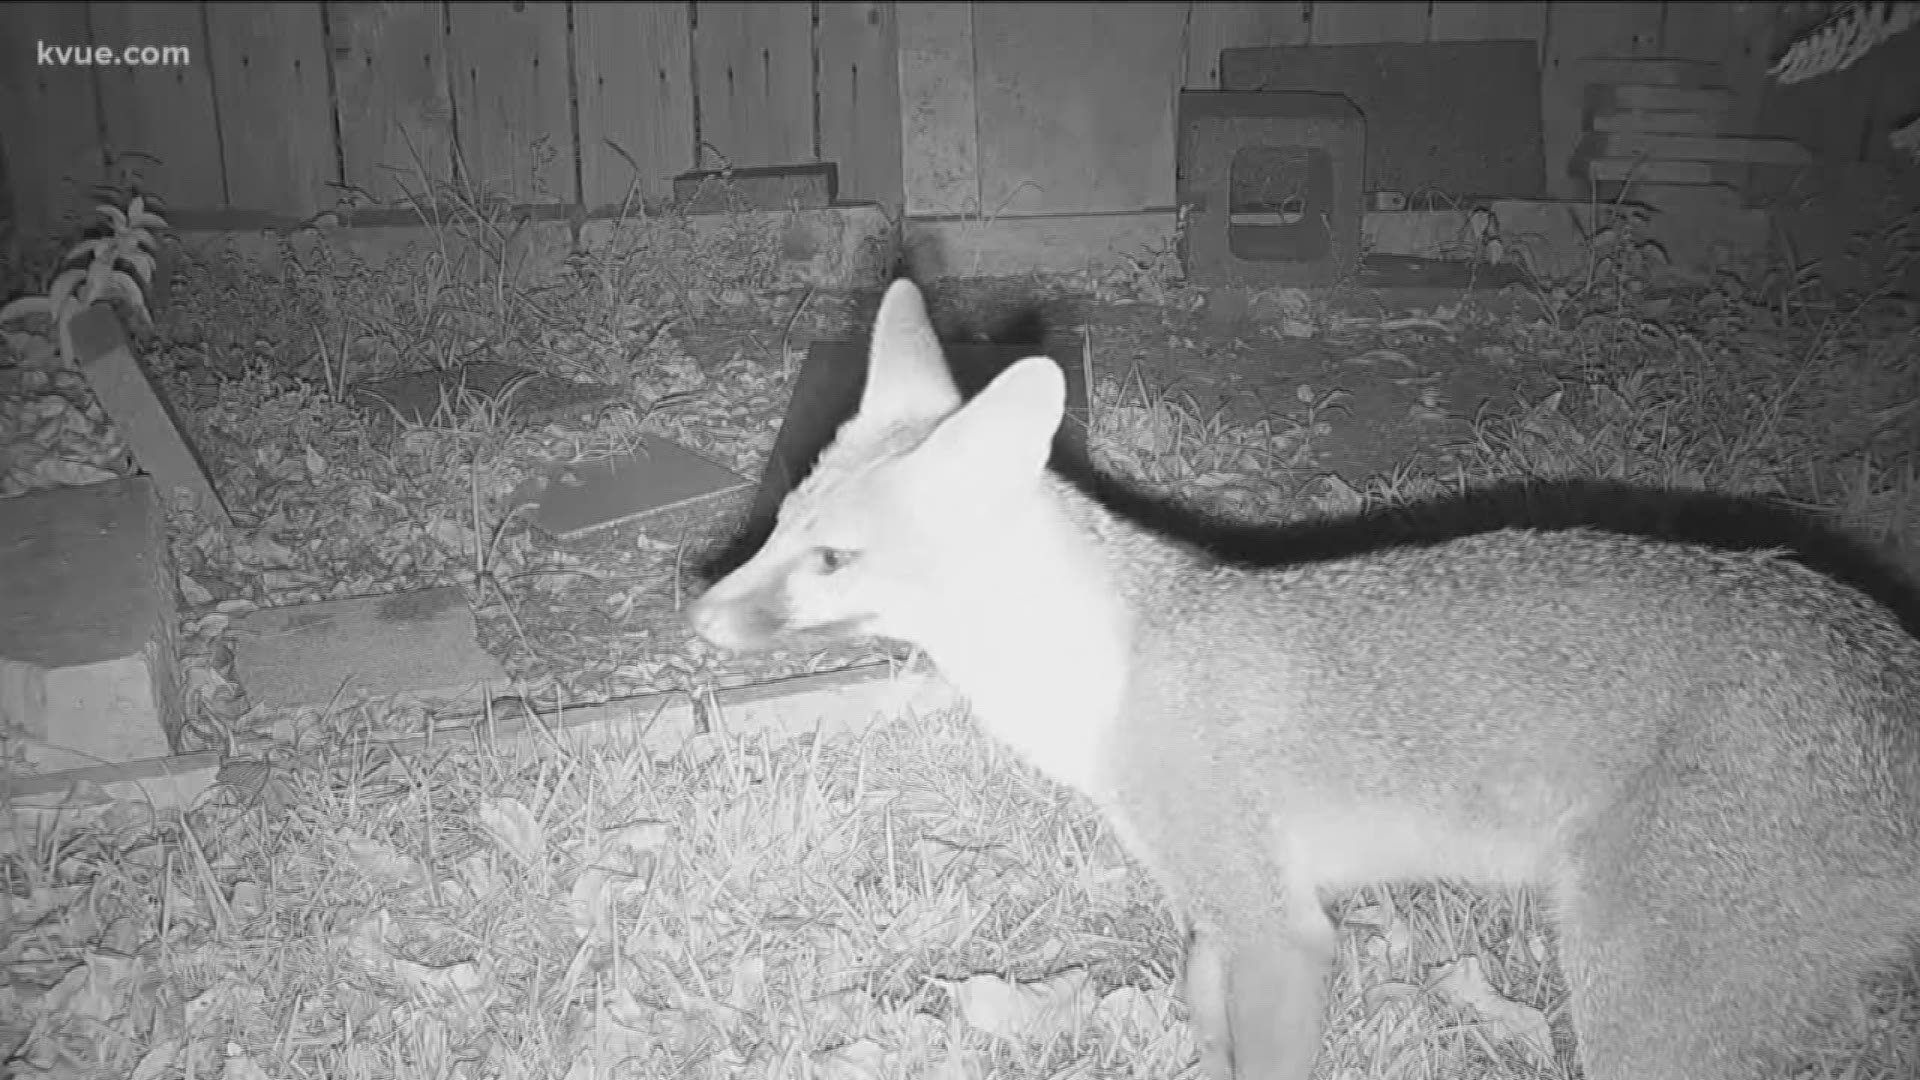 People in North Austin say foxes are showing up in their neighborhoods more often and it's causing concern.